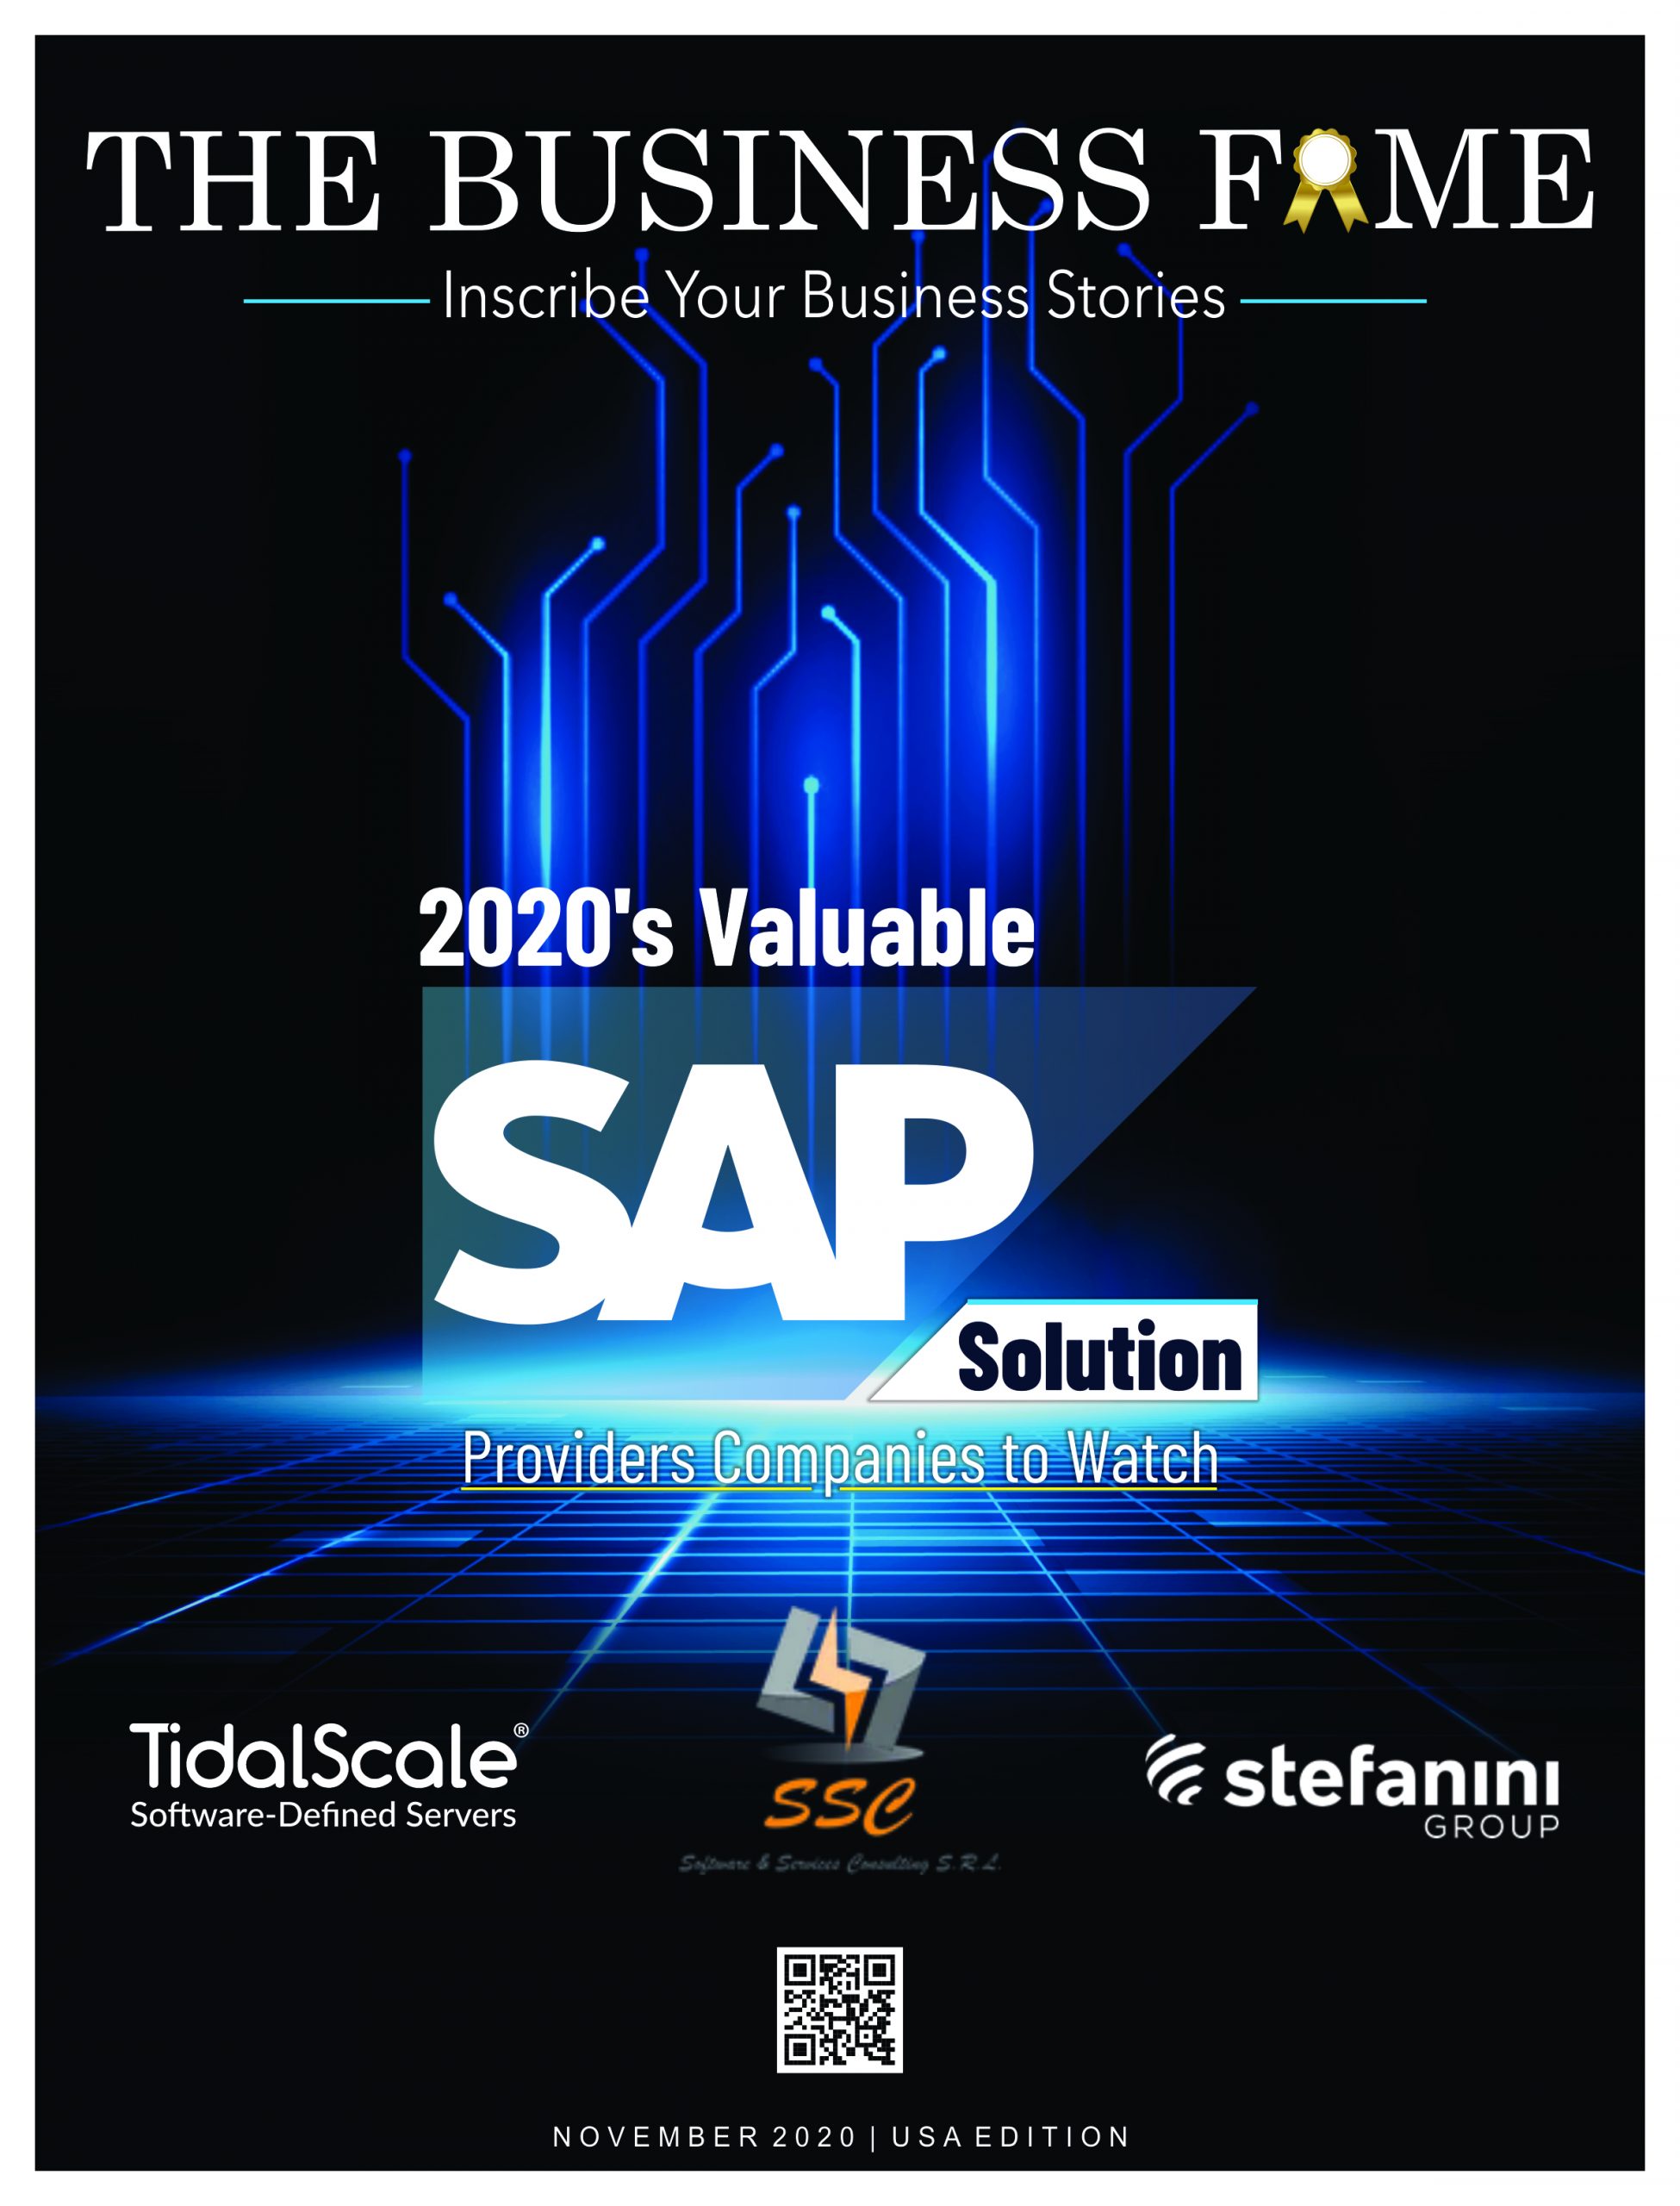 The Business Fame | 2020's Valuable SAP Solution Providers Companies to Watch